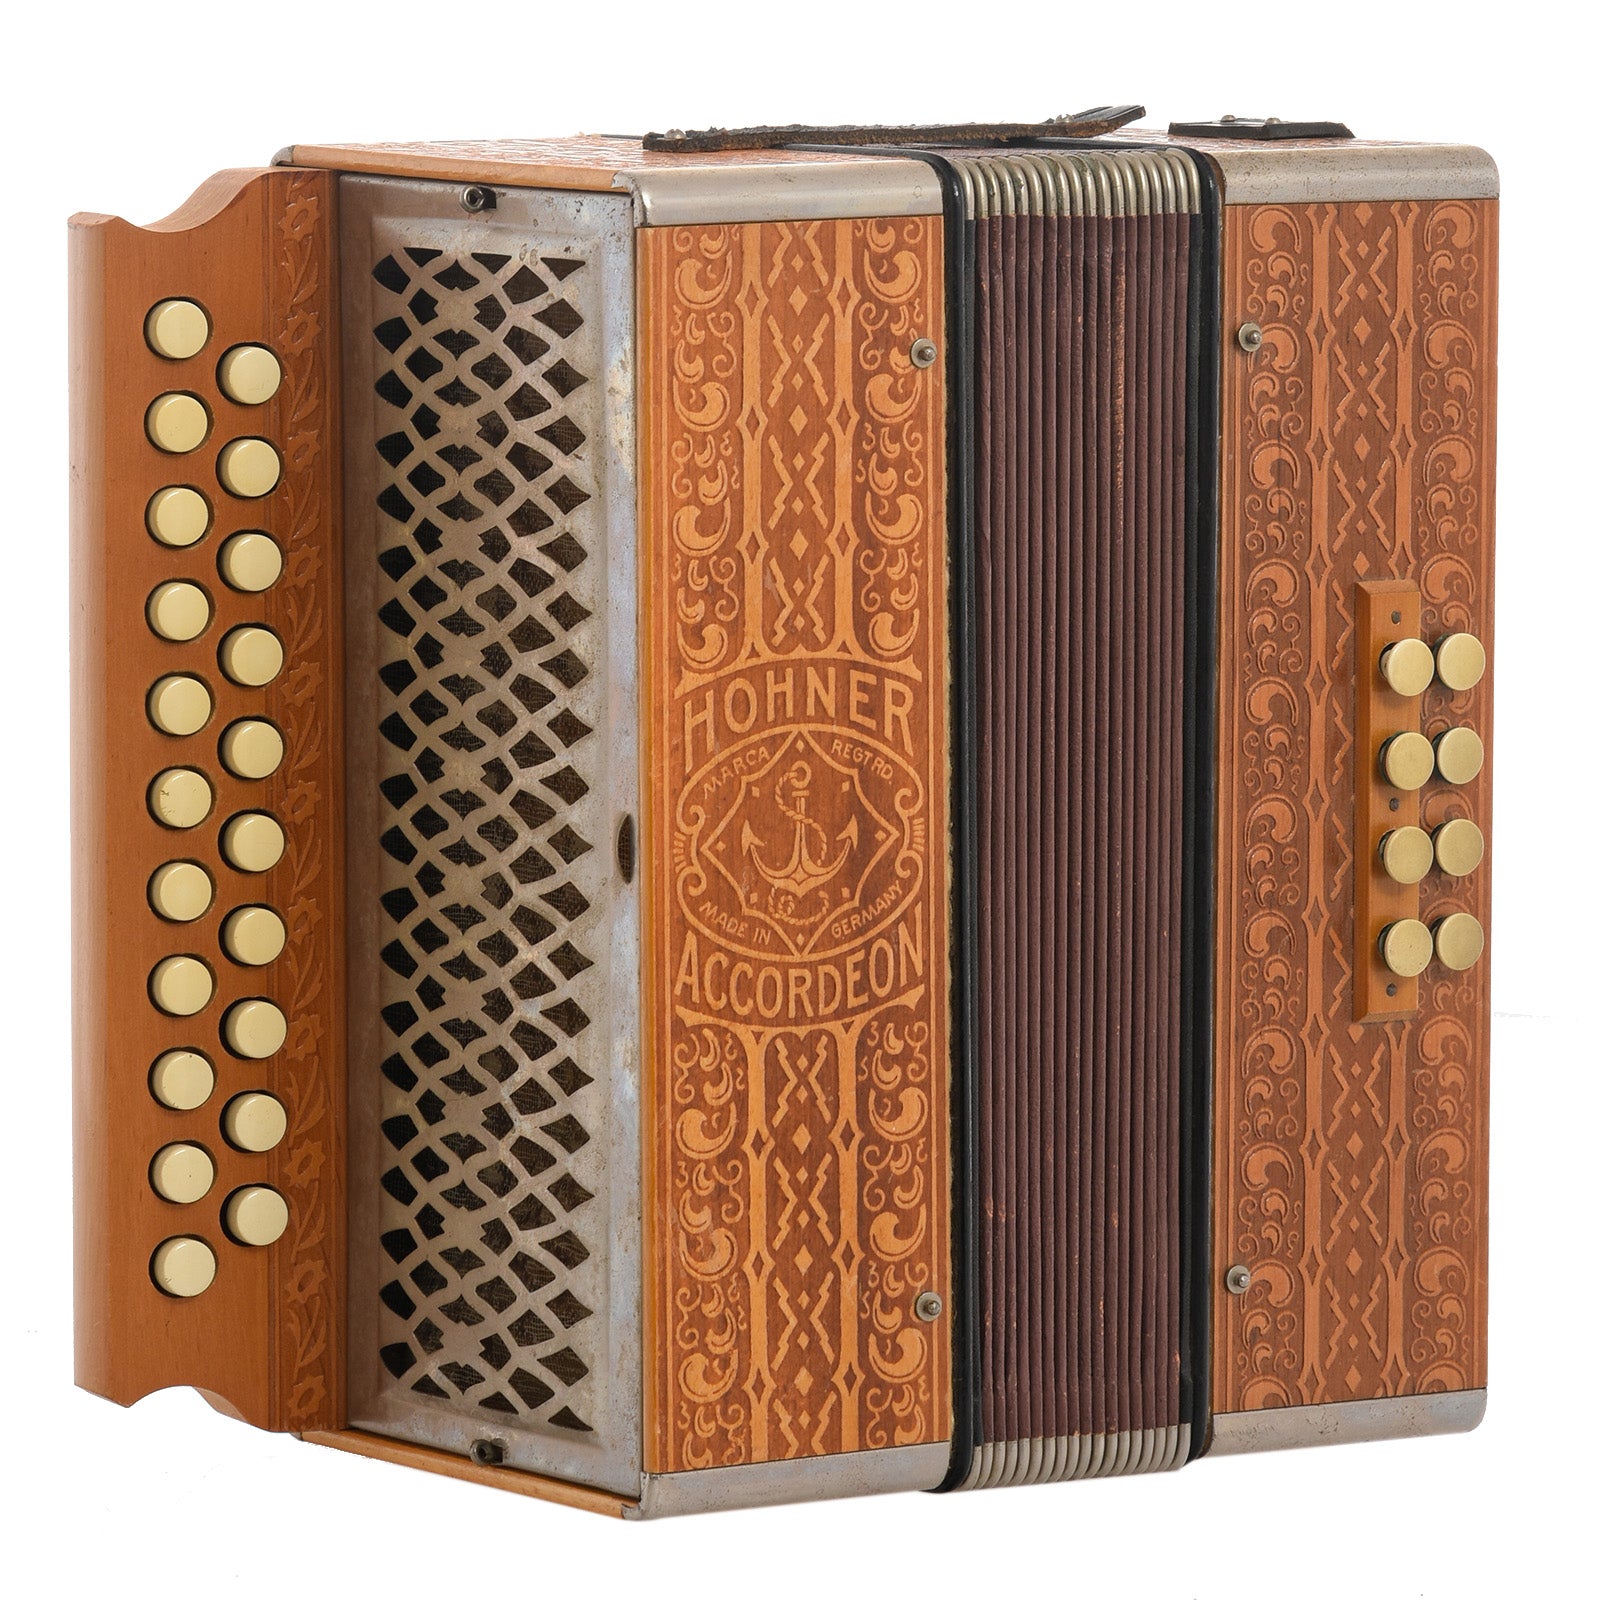 Front and side of Hohner Button Accordion (1920s)